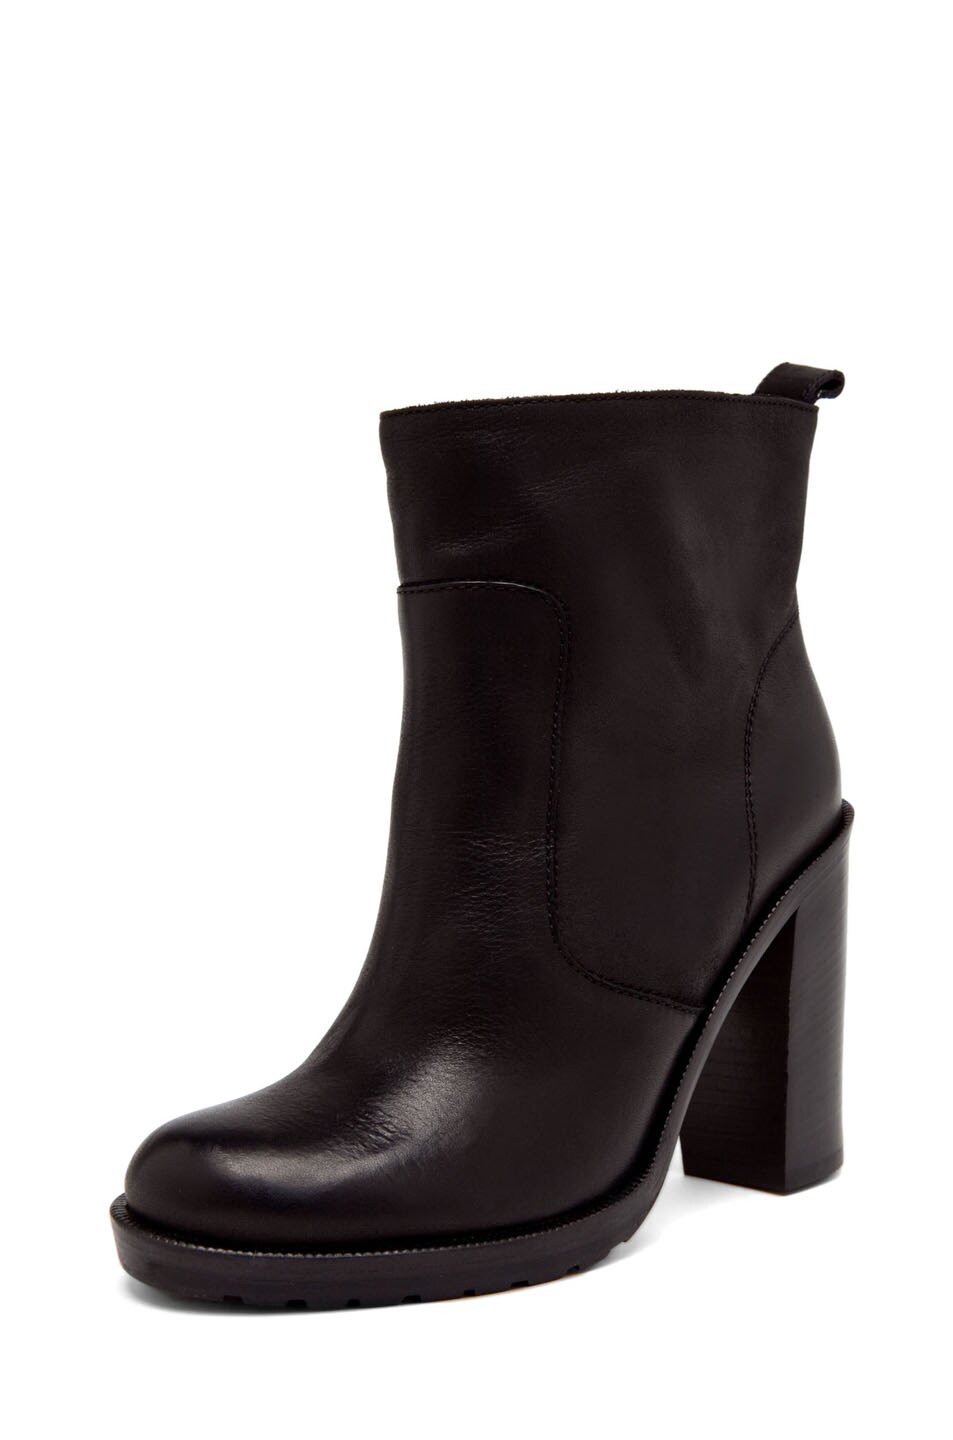 Image 1 of MM6 x Opening Ceremony Bootie in Black